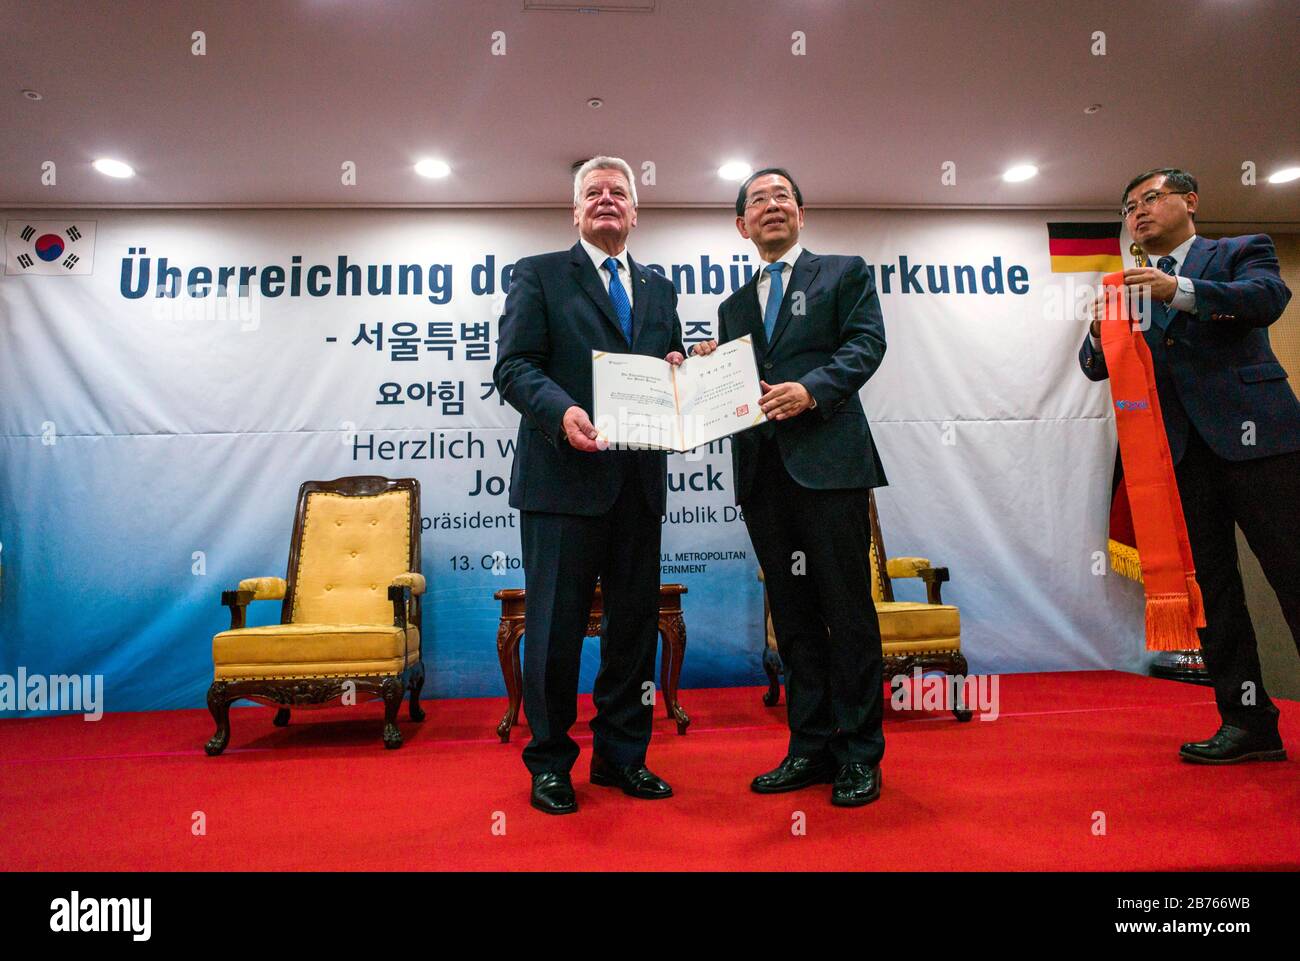 South Korea, Seoul, 13.10.2015. Visit of the German President in Seoul, South Korea on 13.10.2015. Award of the Ehrenburg Stole and Medal of the >City of Seoul. Joachim Gauck (left), German President, and Park Won-soon, Mayor of Seoul. [automated translation] Stock Photo